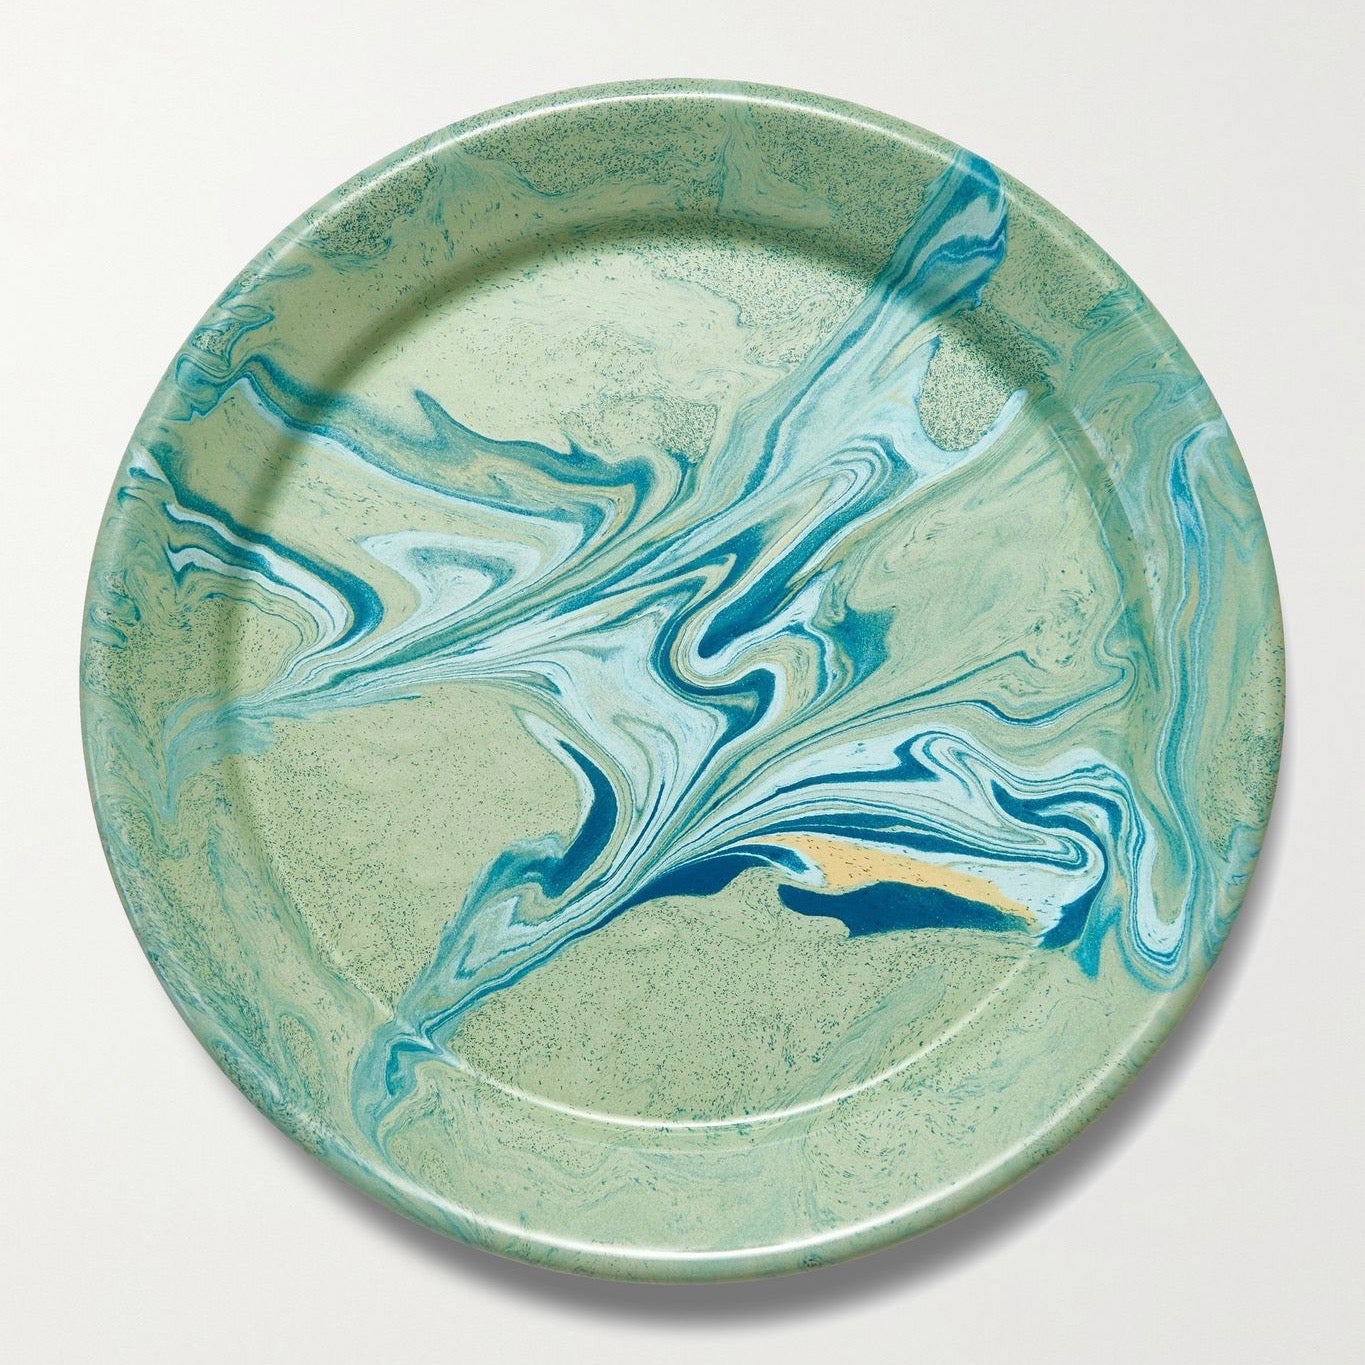 Clumsy Friends and Chic Outdoor Parties Can Coexist With This Unbreakable Dinnerware